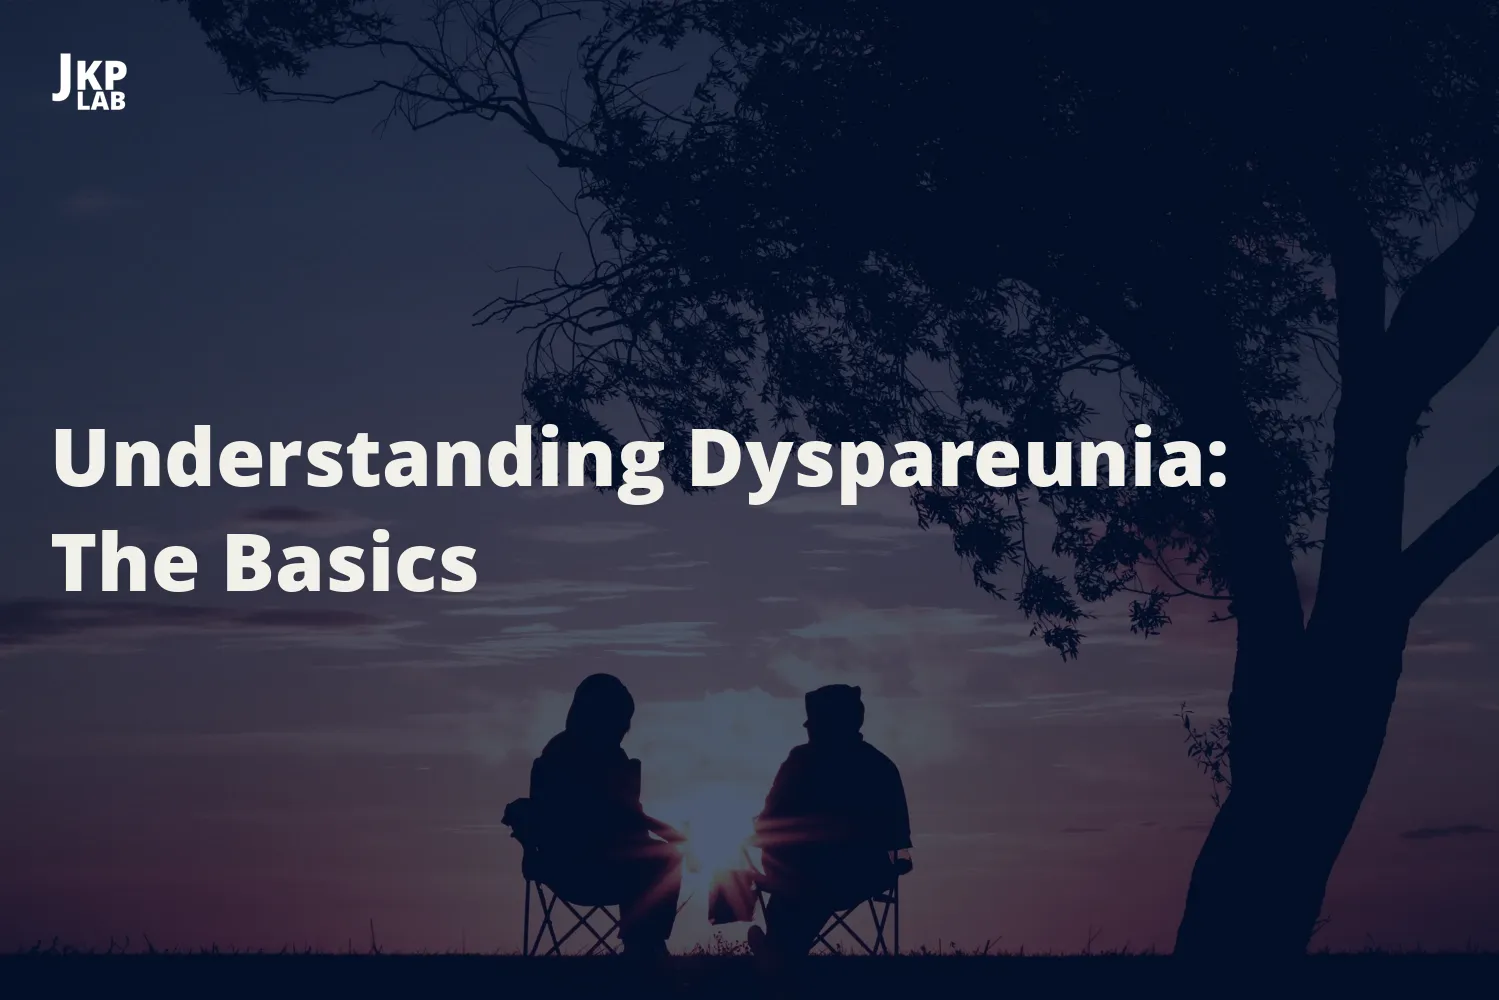 The Role of Hormonal Imbalance in Dyspareunia